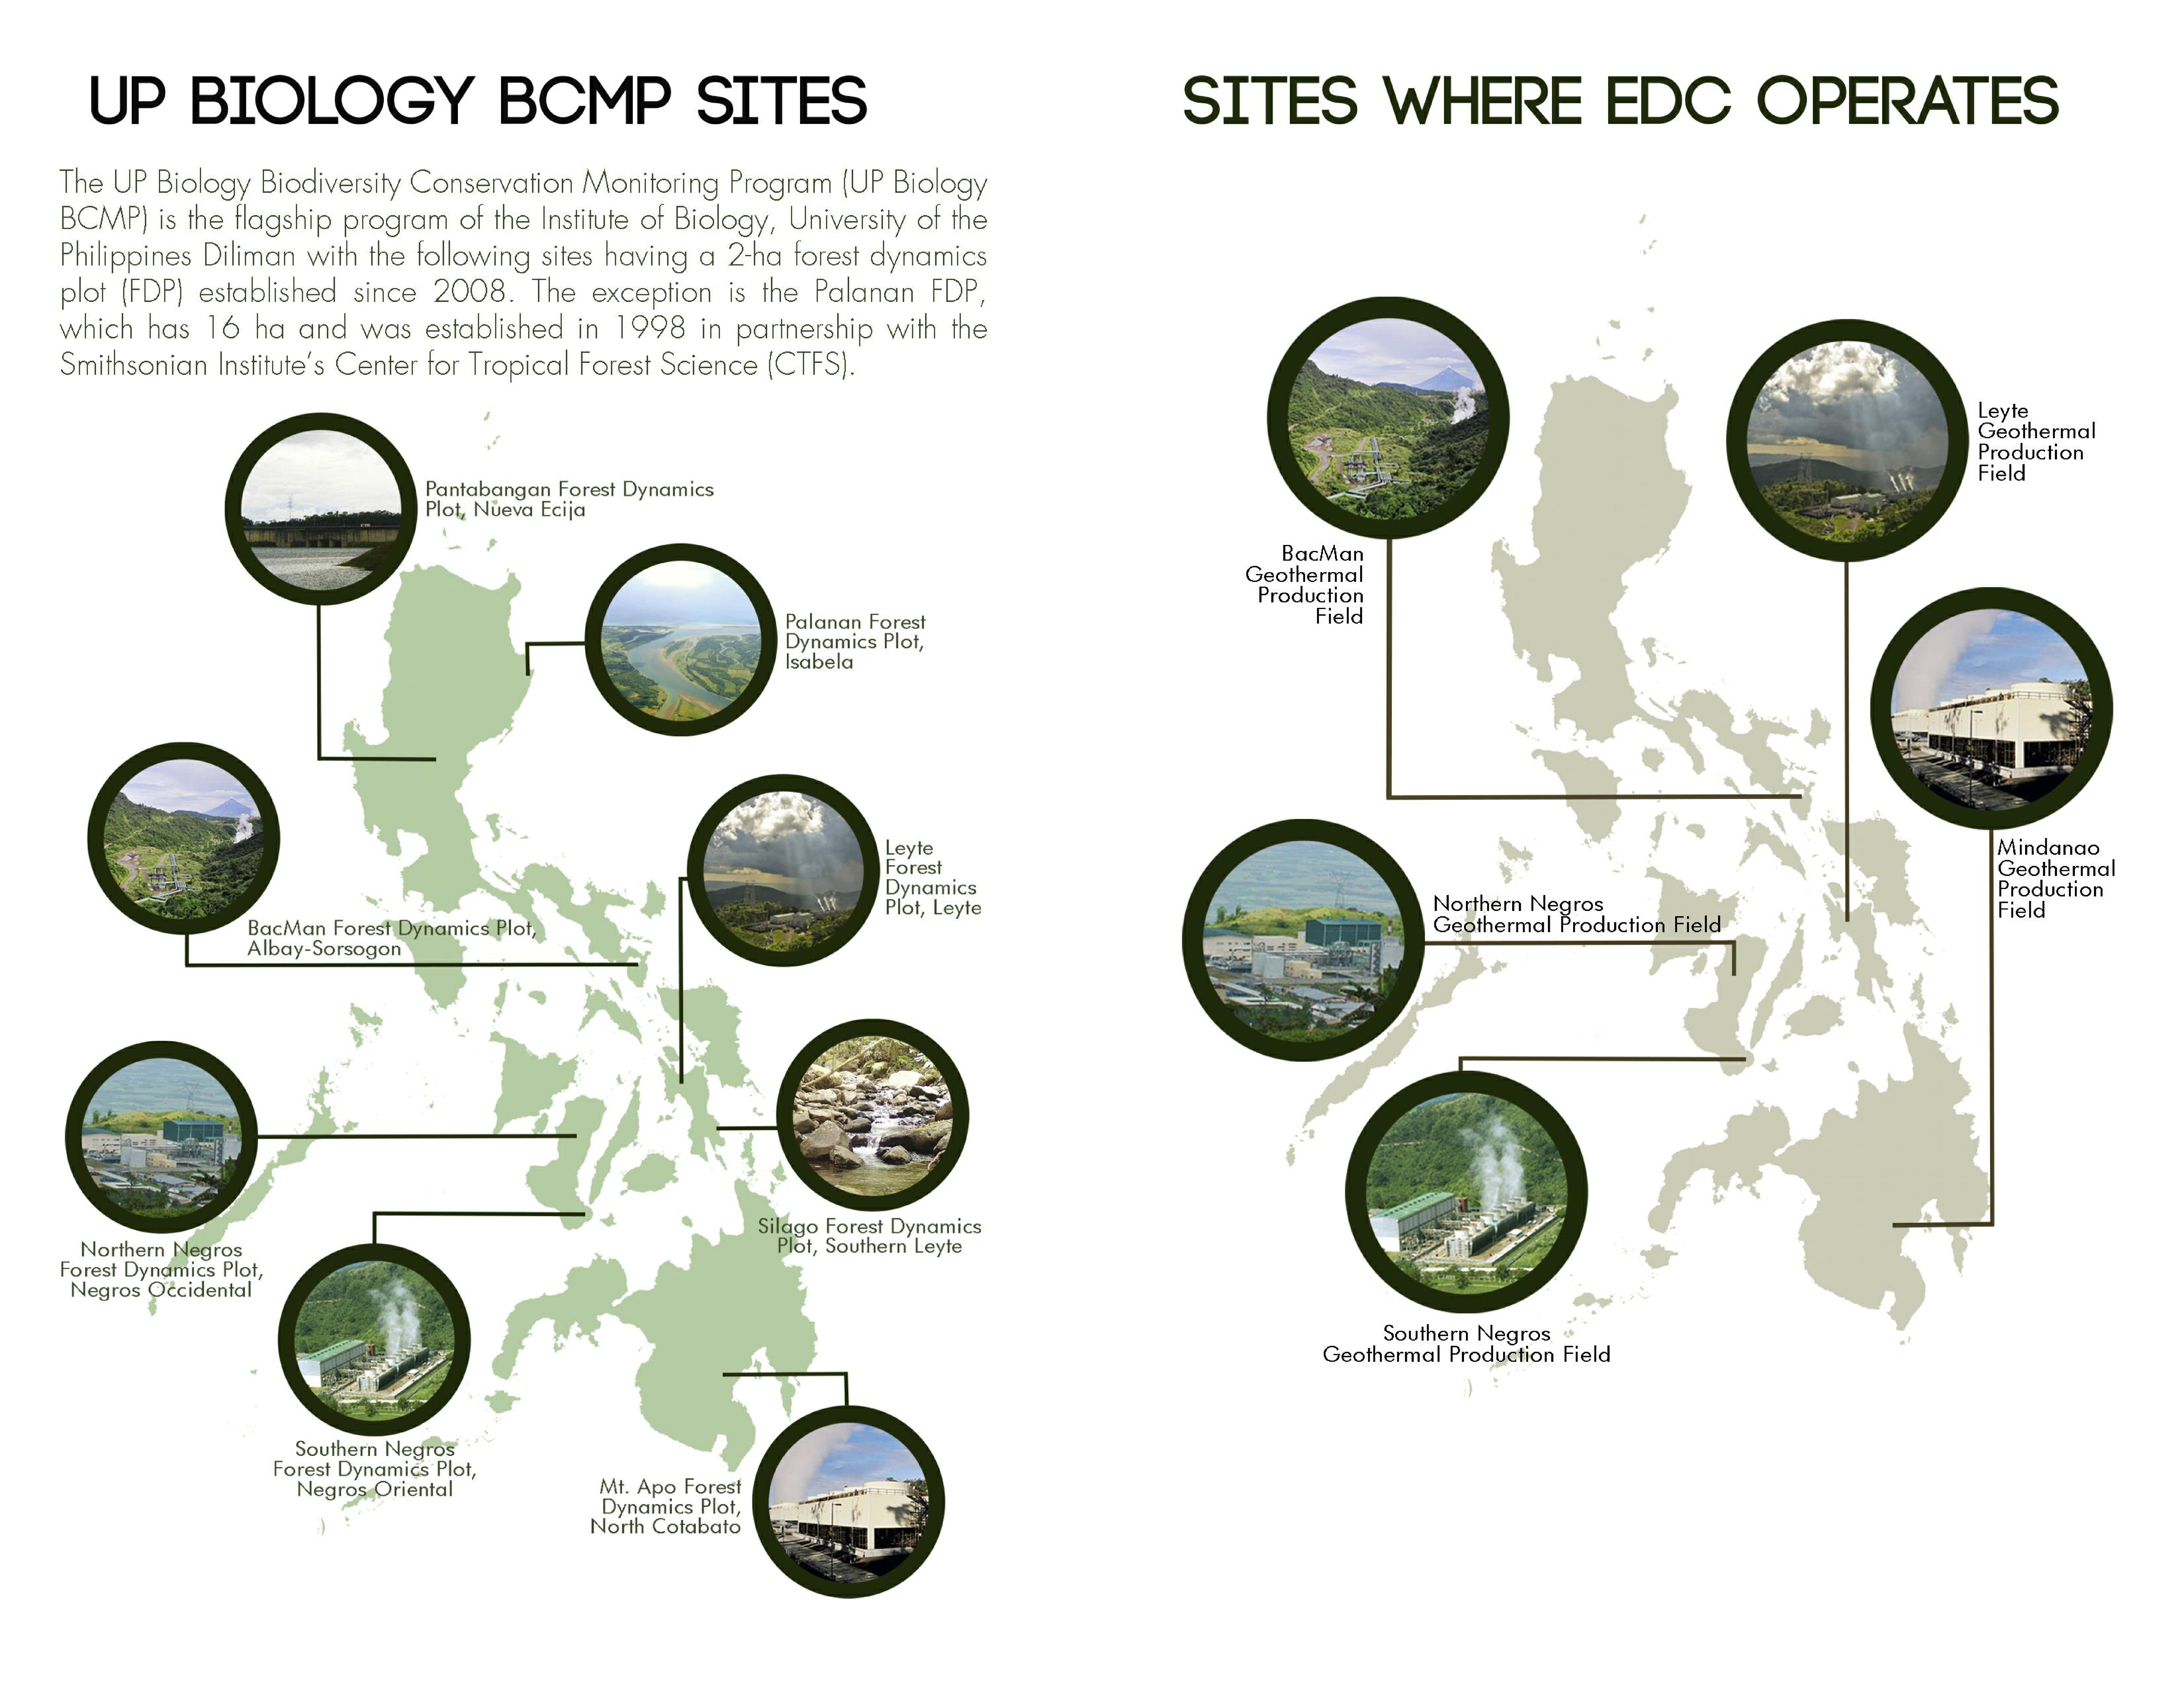 Copy of 2013 Snapshot of Philippine Forests - Trees in EDC Forest Dynamics Plot-02